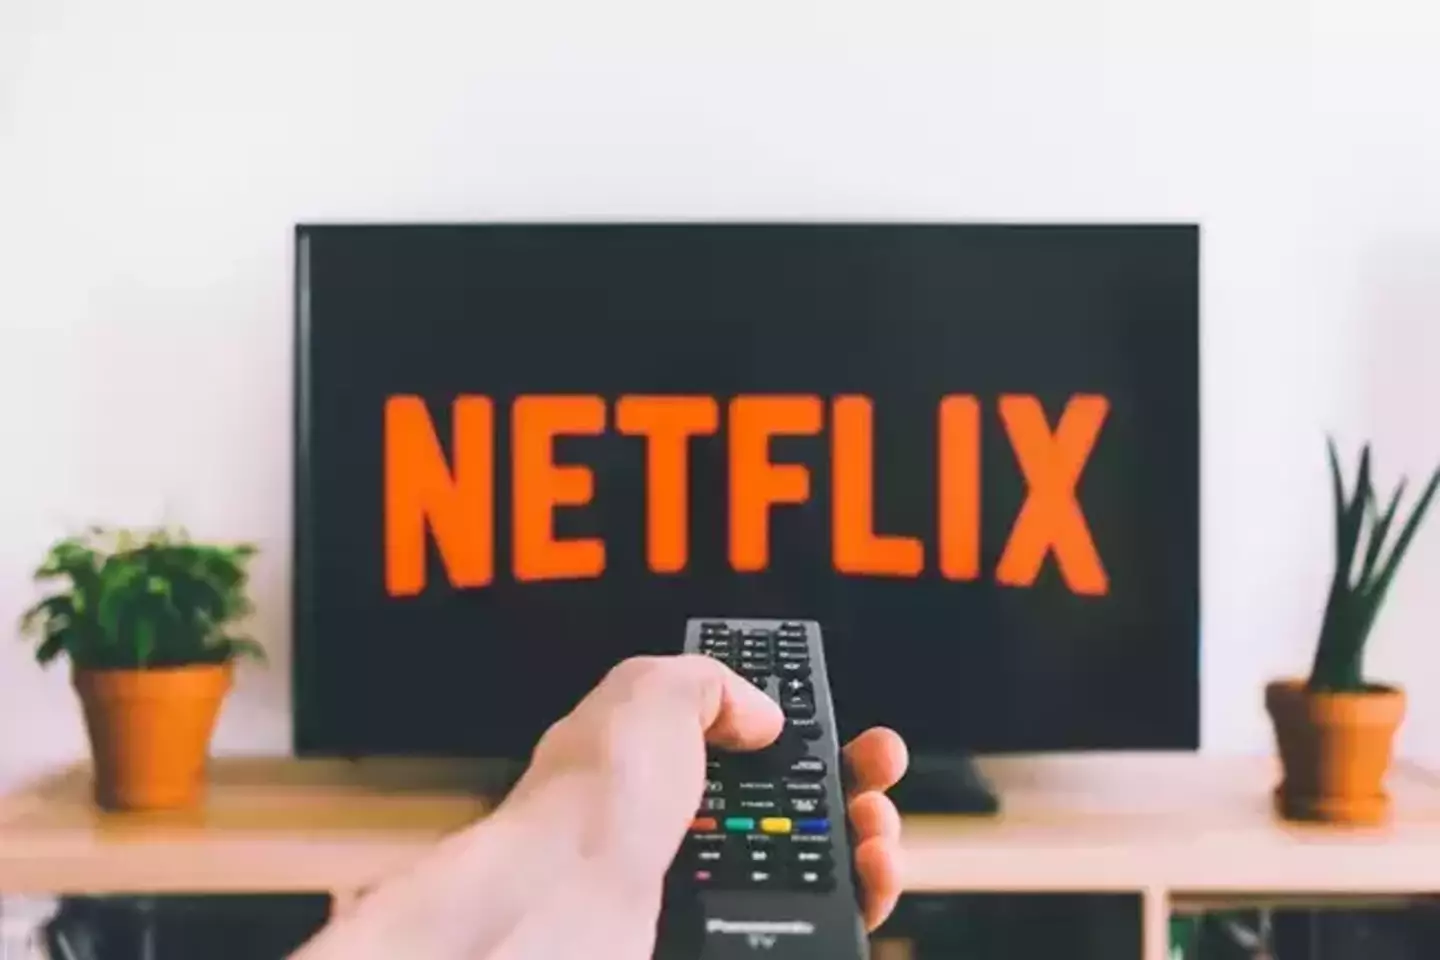 Netflix's cheapest plan restricts access to certain films and TV shows.